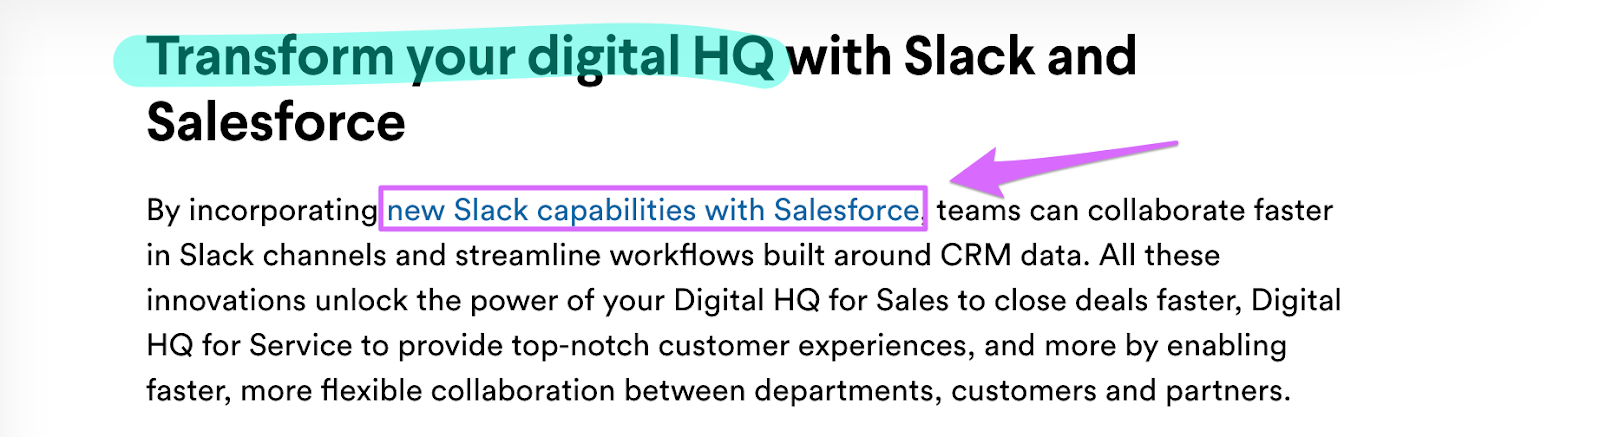 conclusion where slack says to transform your digital hq